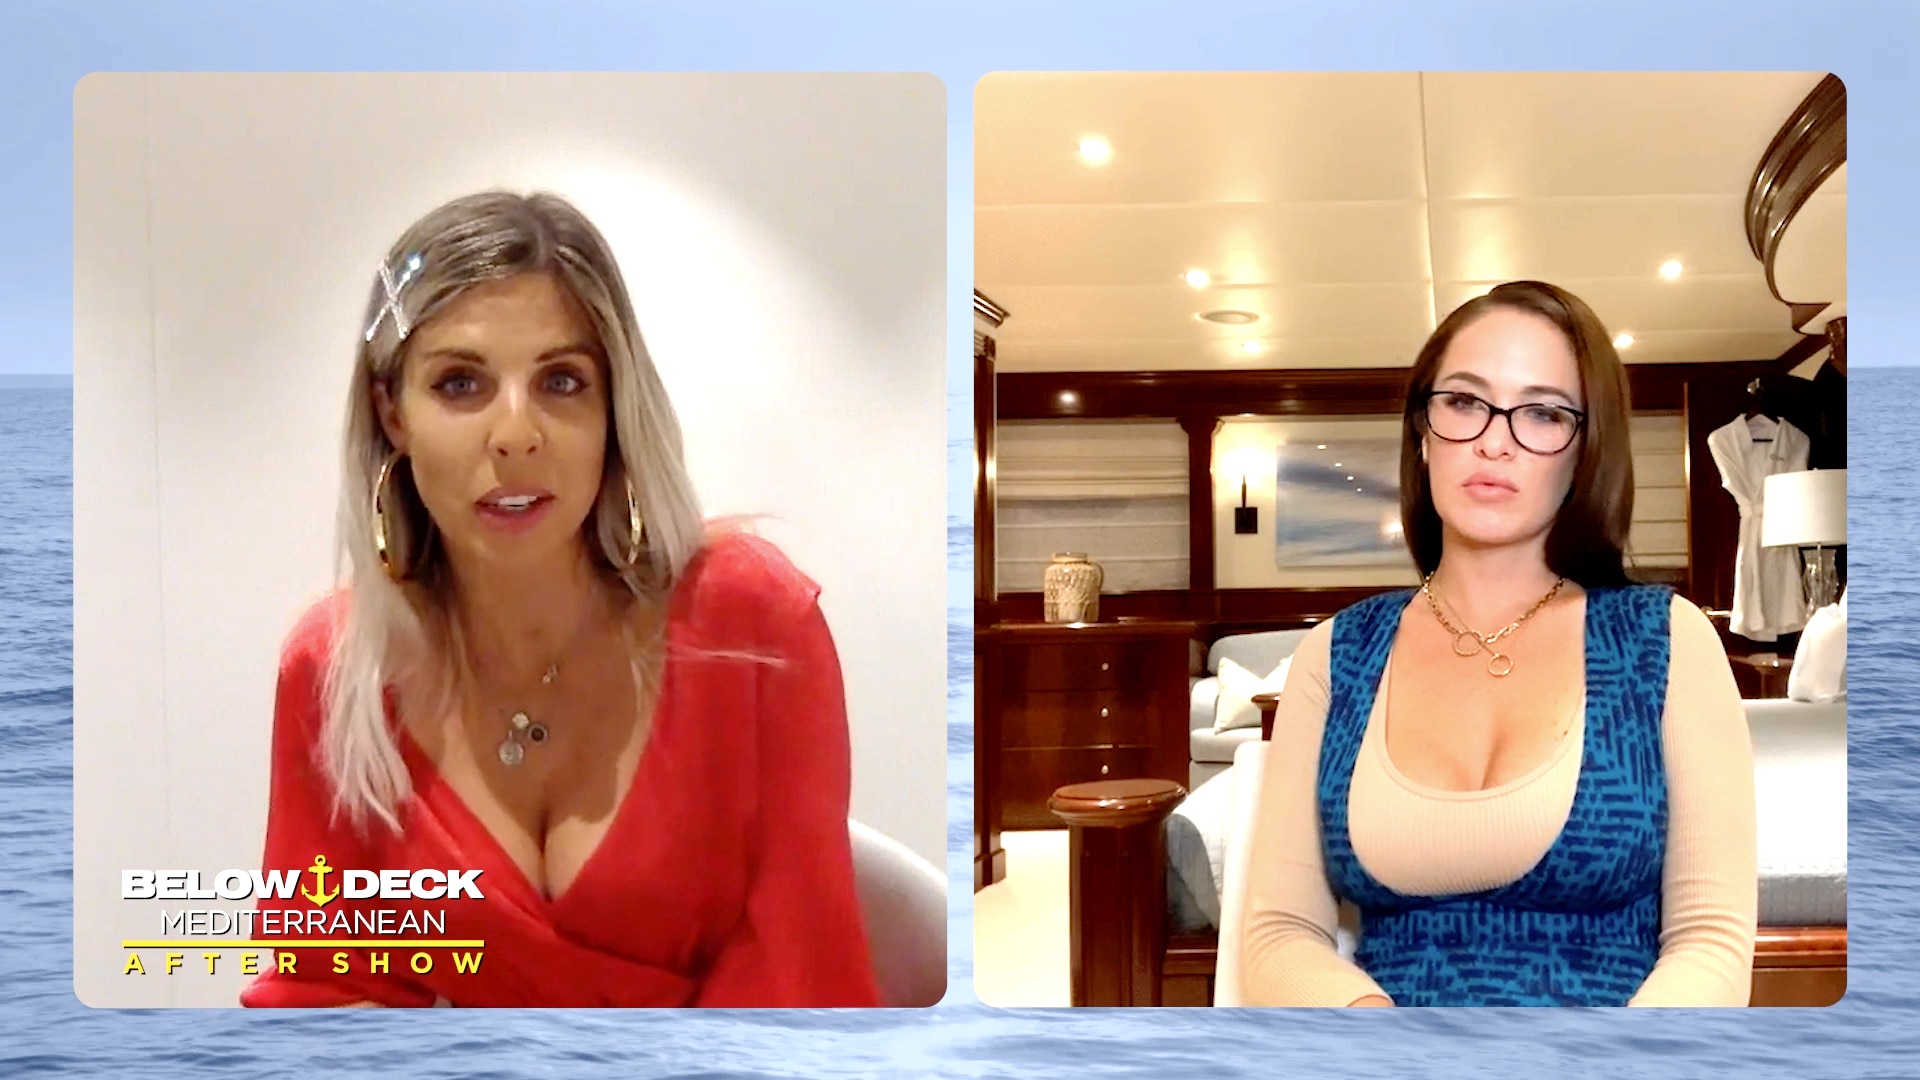 The Below Deck Mediterranean Cast Reveal What They’re Looking Forward to the Most Post-Yachting